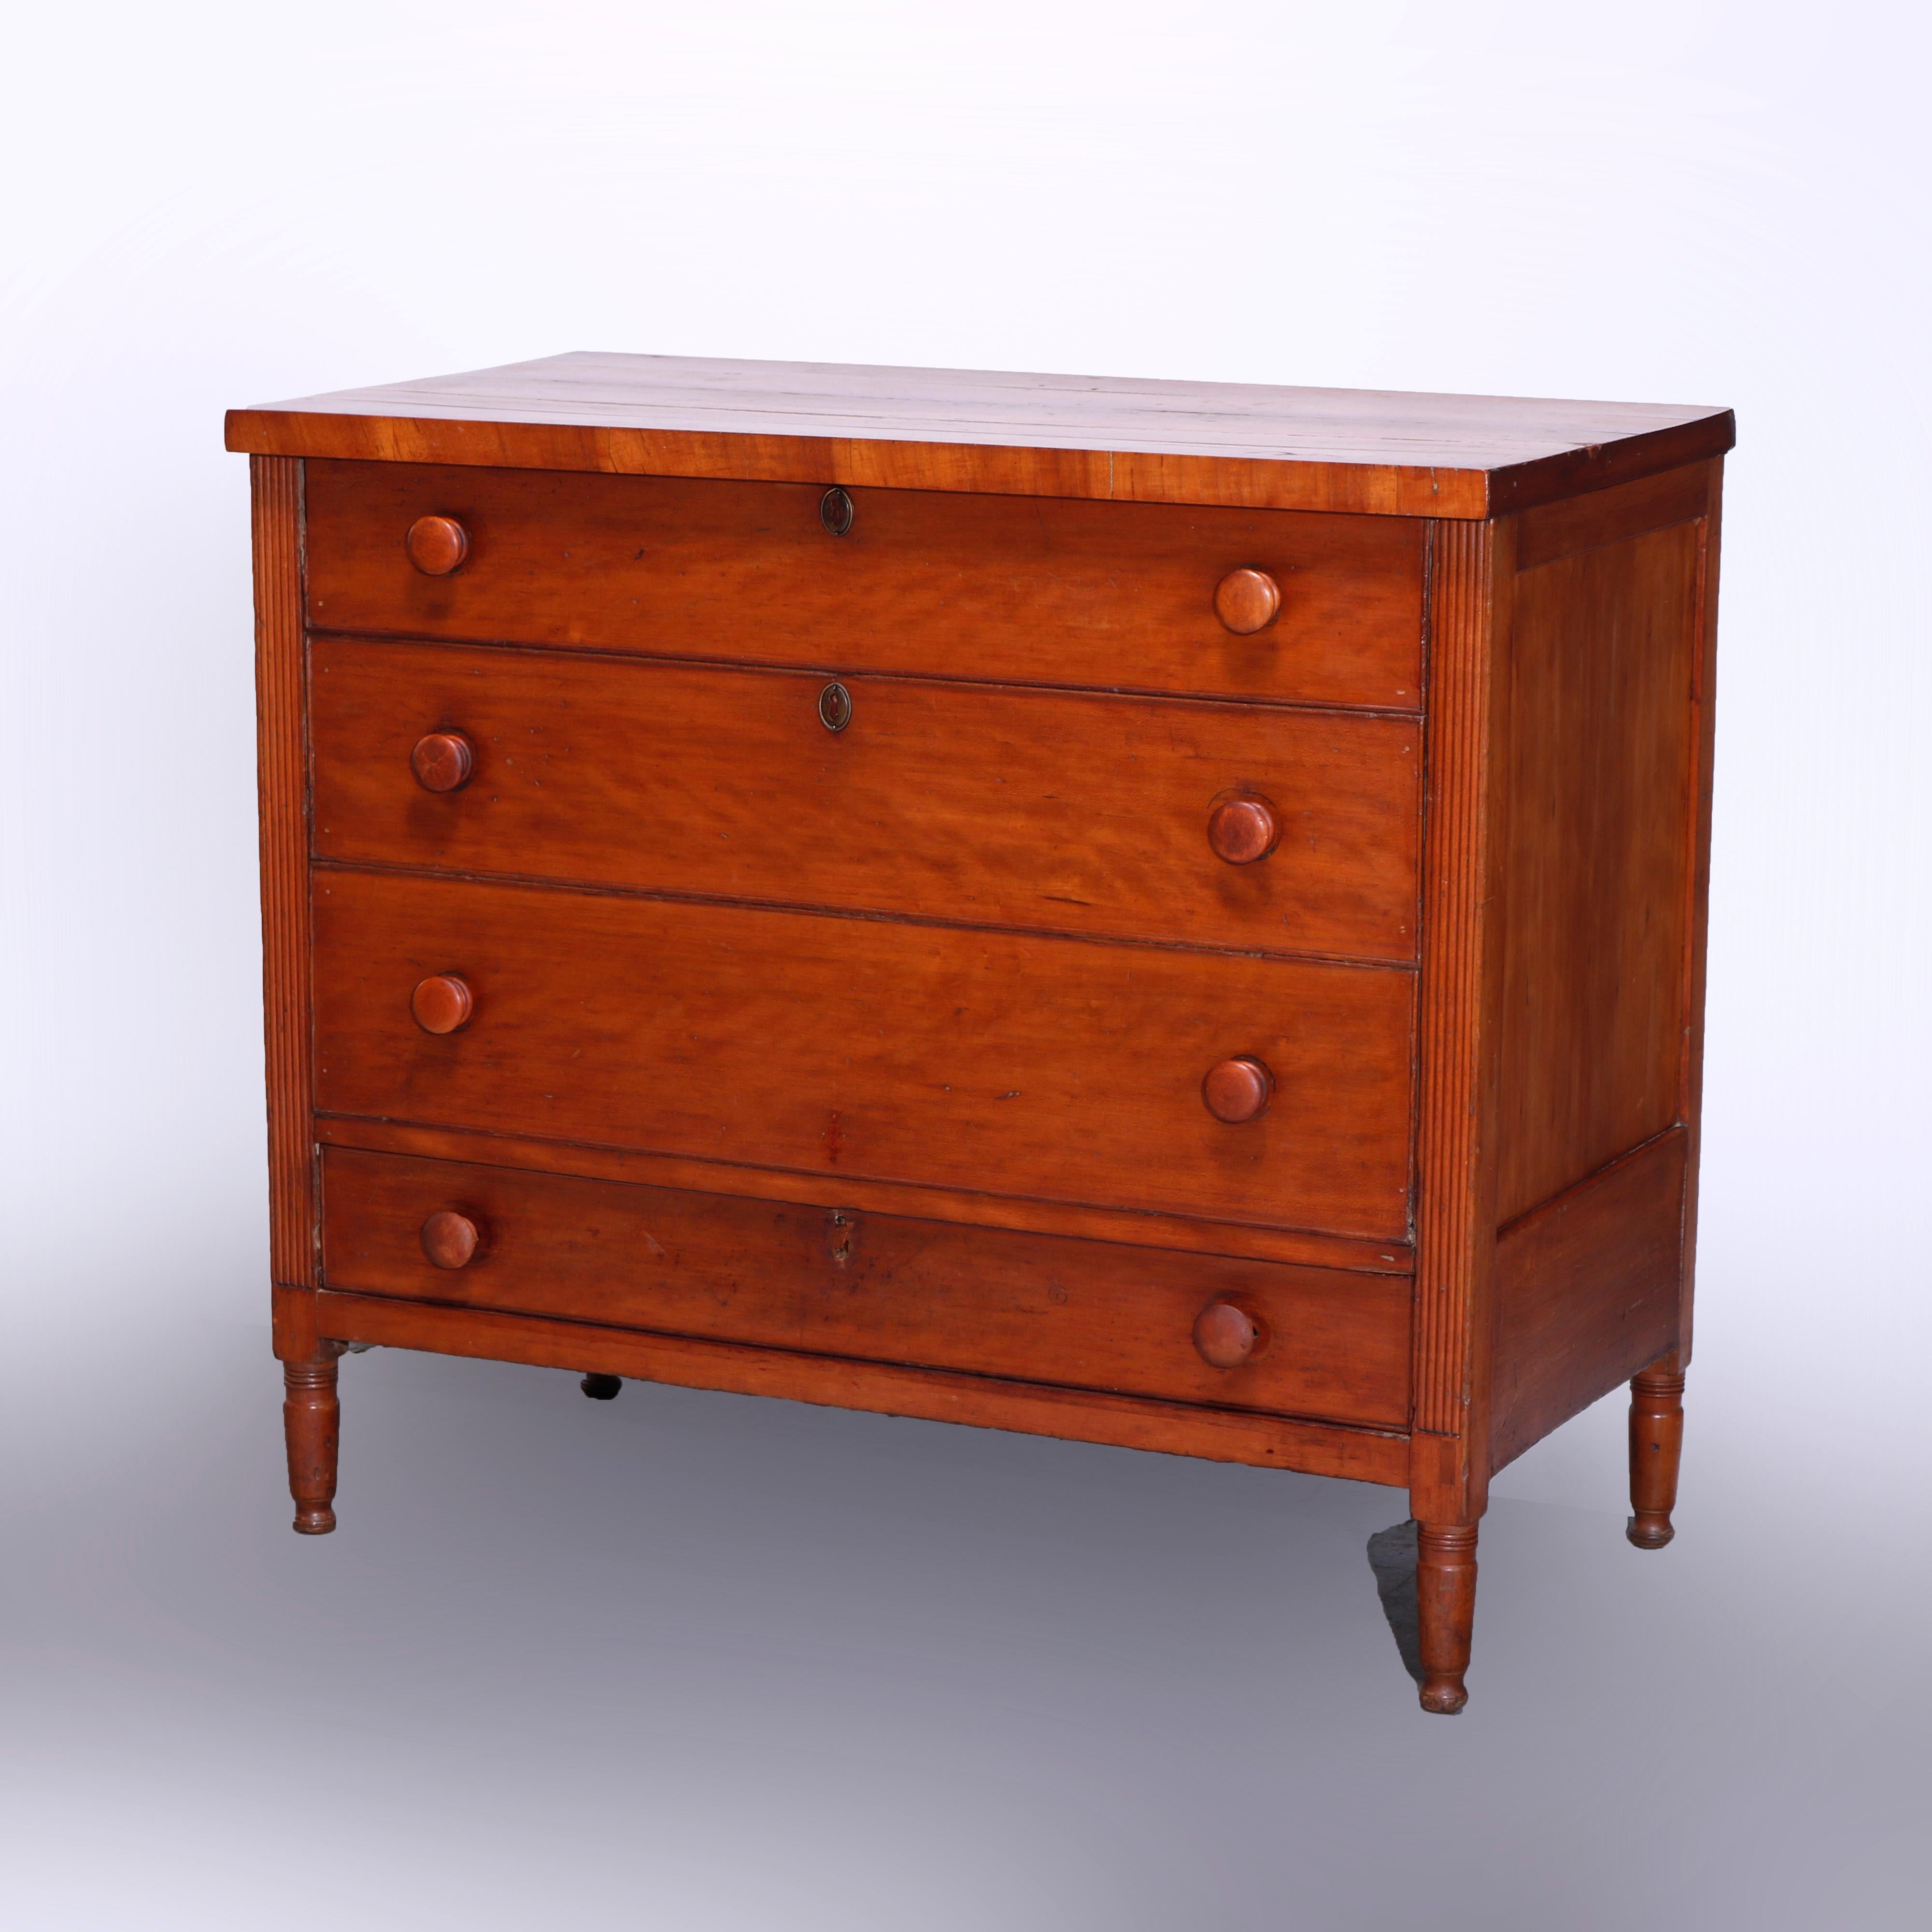 An antique Sheraton blanket chest offers cherry construction with top opening to painted interior and having three faux drawers over single lower drawer, flanked by reeded supports and raised on turned legs, c1830

Measures - 35''H x 40''W x